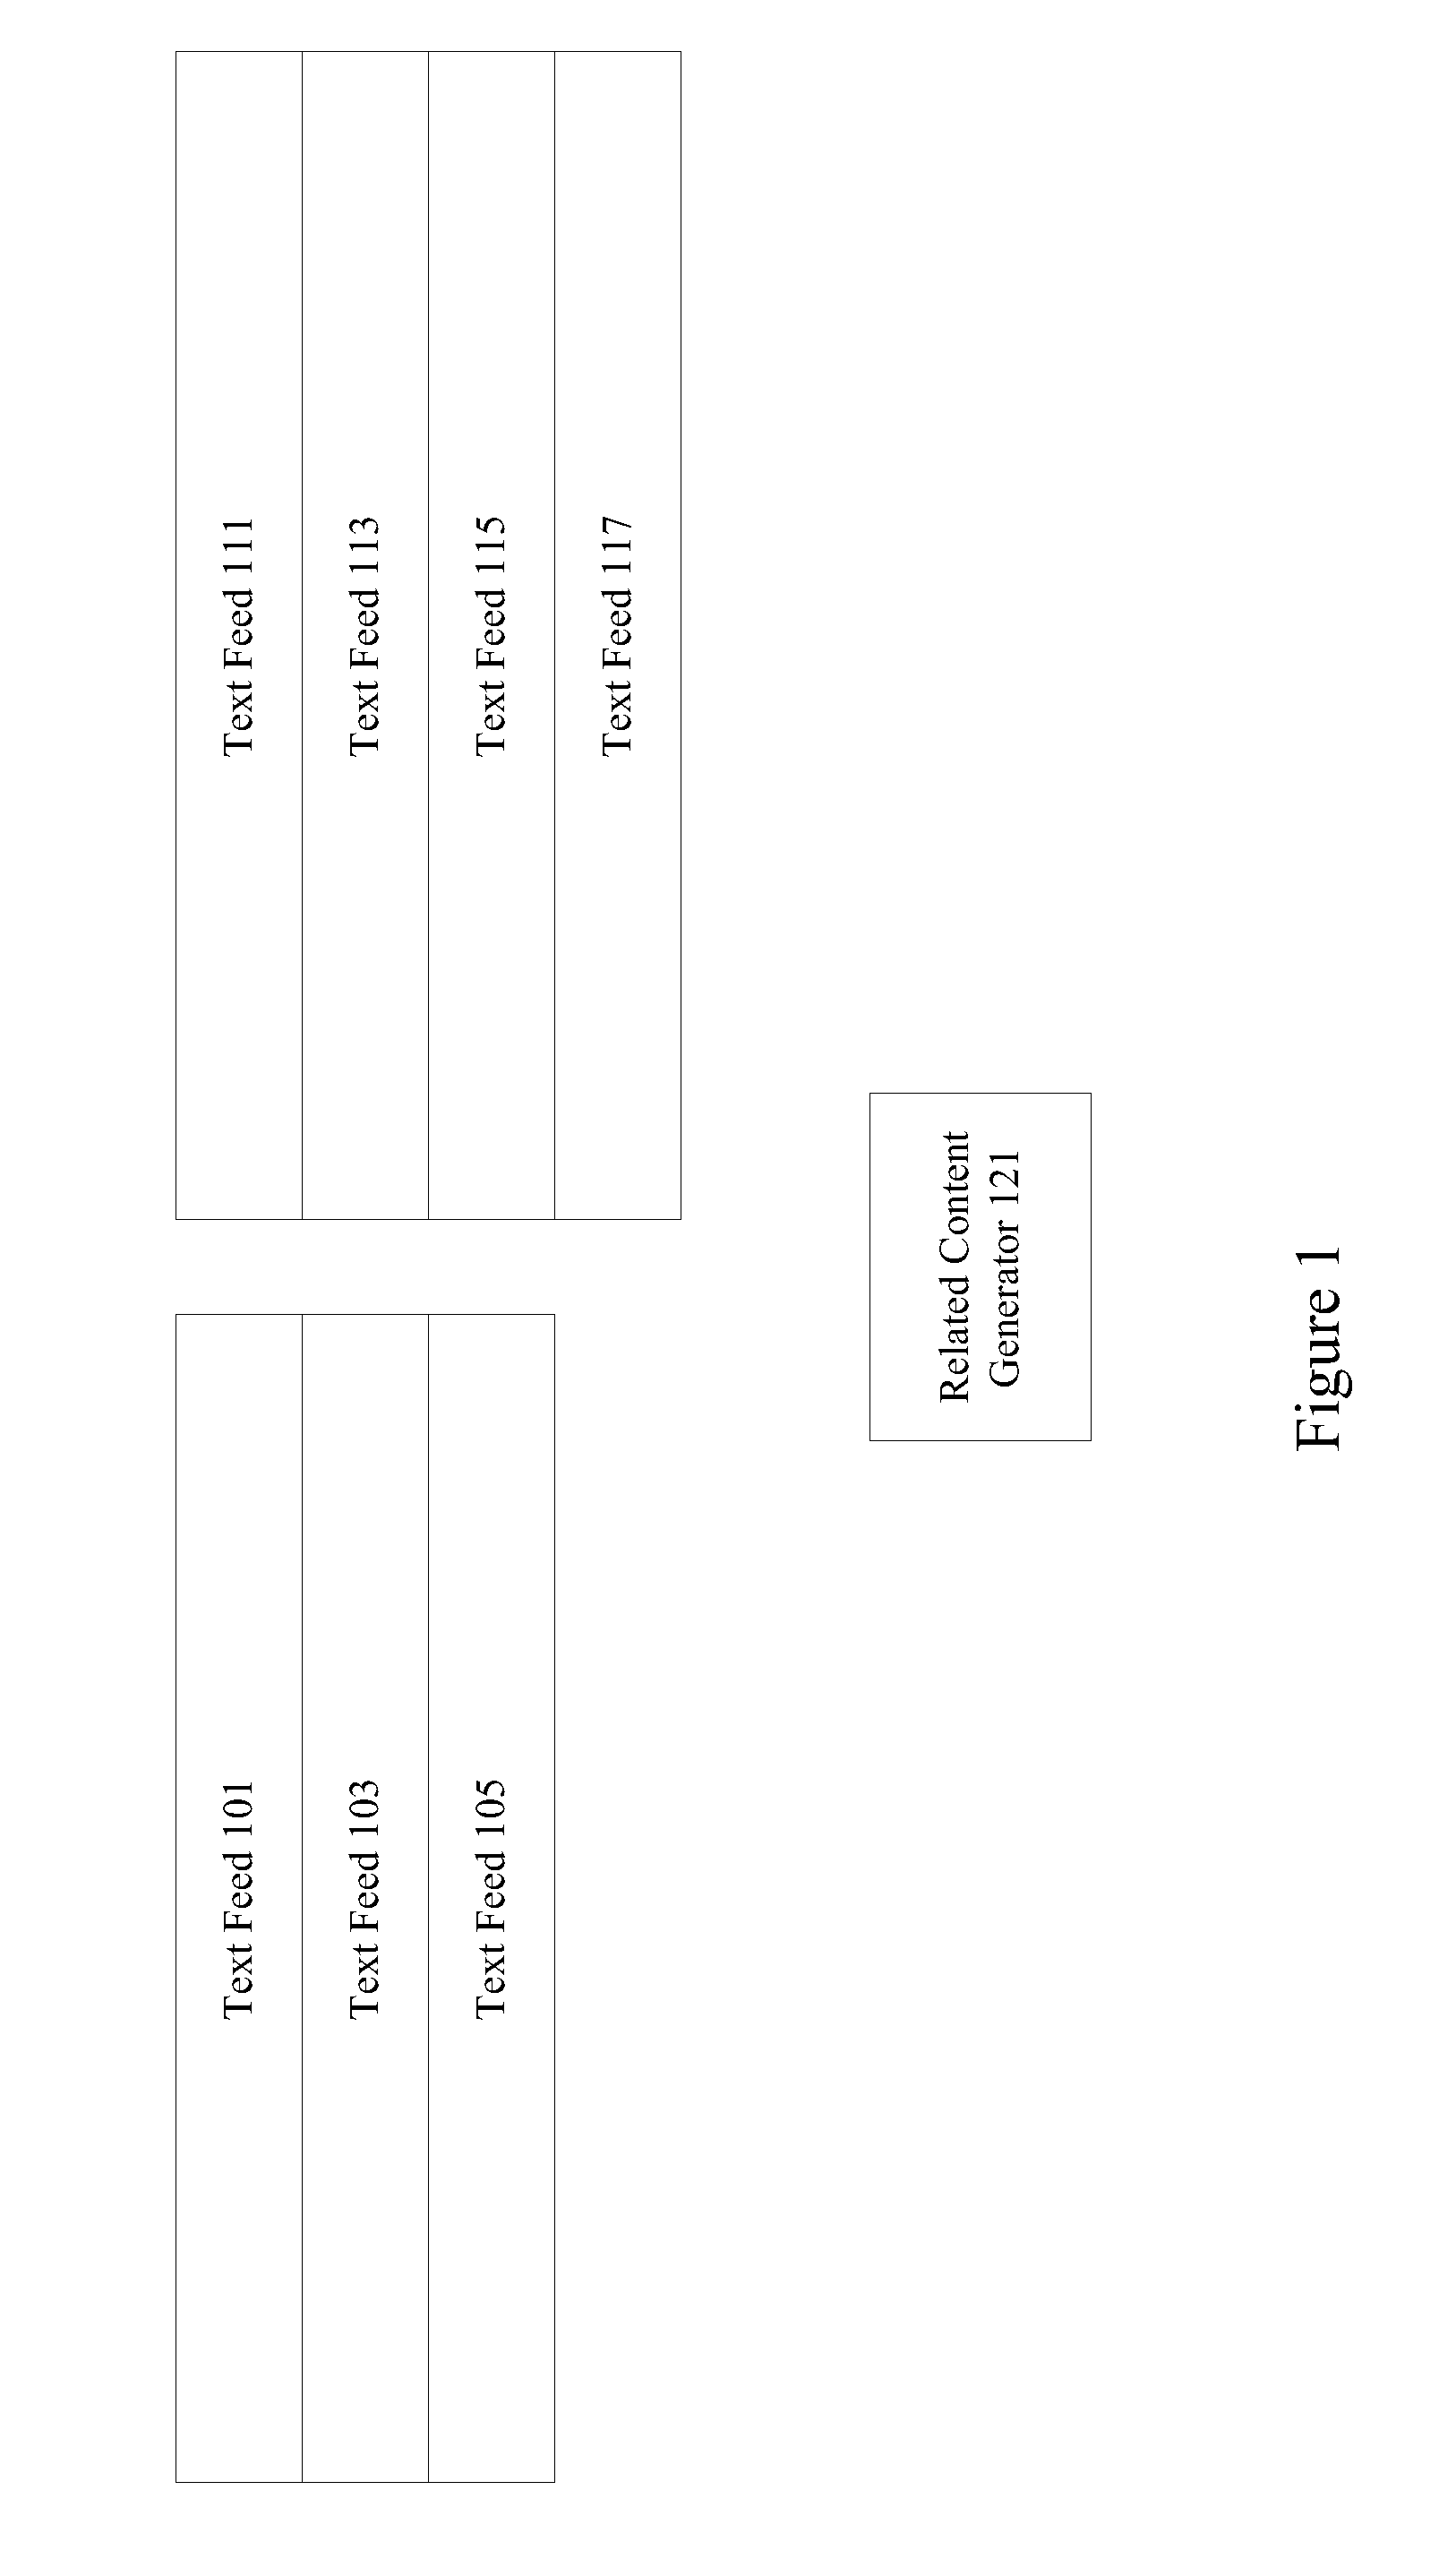 Retrieval and display of related content using text stream data feeds